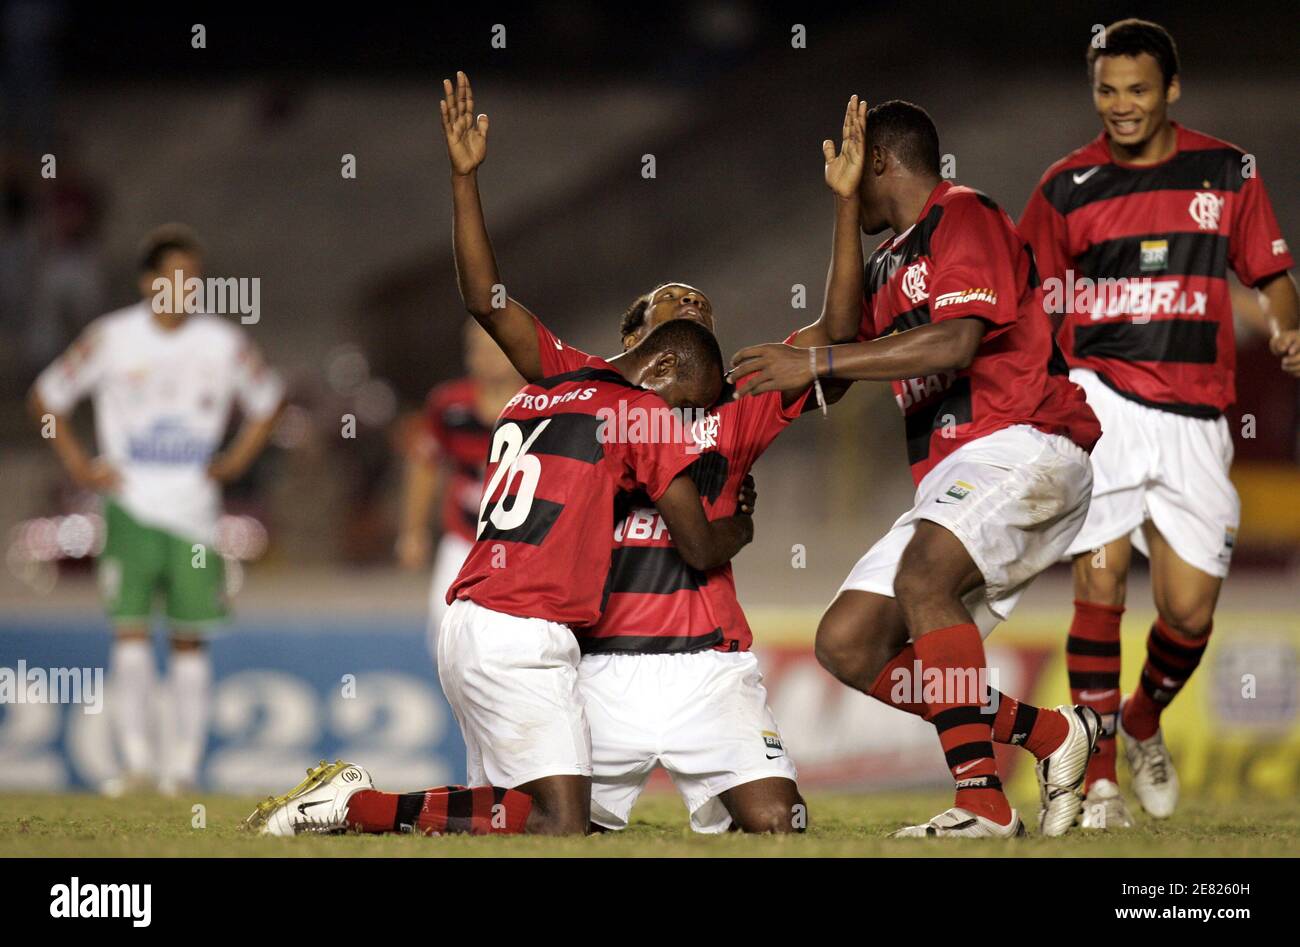 Flamengo's Renato (2nd L) celebrates with team mates Vinicius (L), Obina (2nd R) and Jonatas (R) after scoring a goal against Ipatinga during the second leg of their Brazil Cup semi-final soccer match at the Maracana stadium in Rio de Janeiro, May 18, 2006.   REUTERS/Sergio Moraes Stock Photo